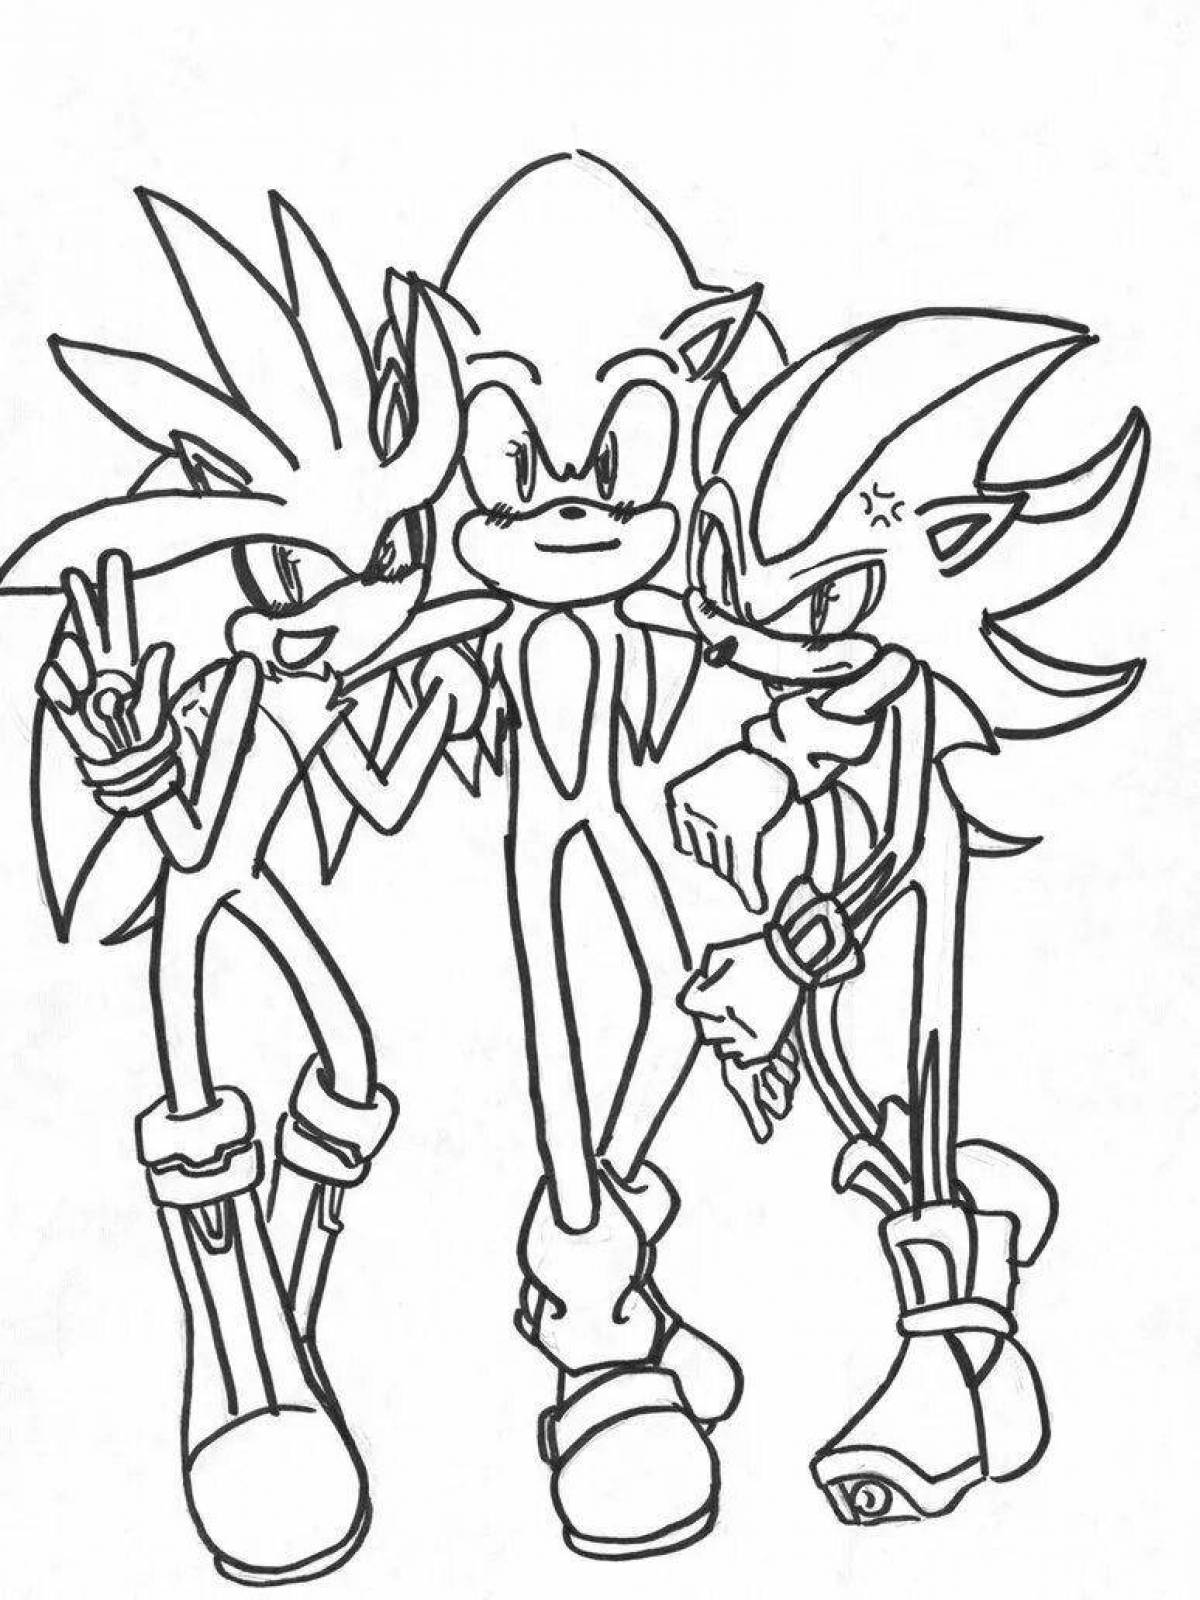 Charming sonic seal coloring book